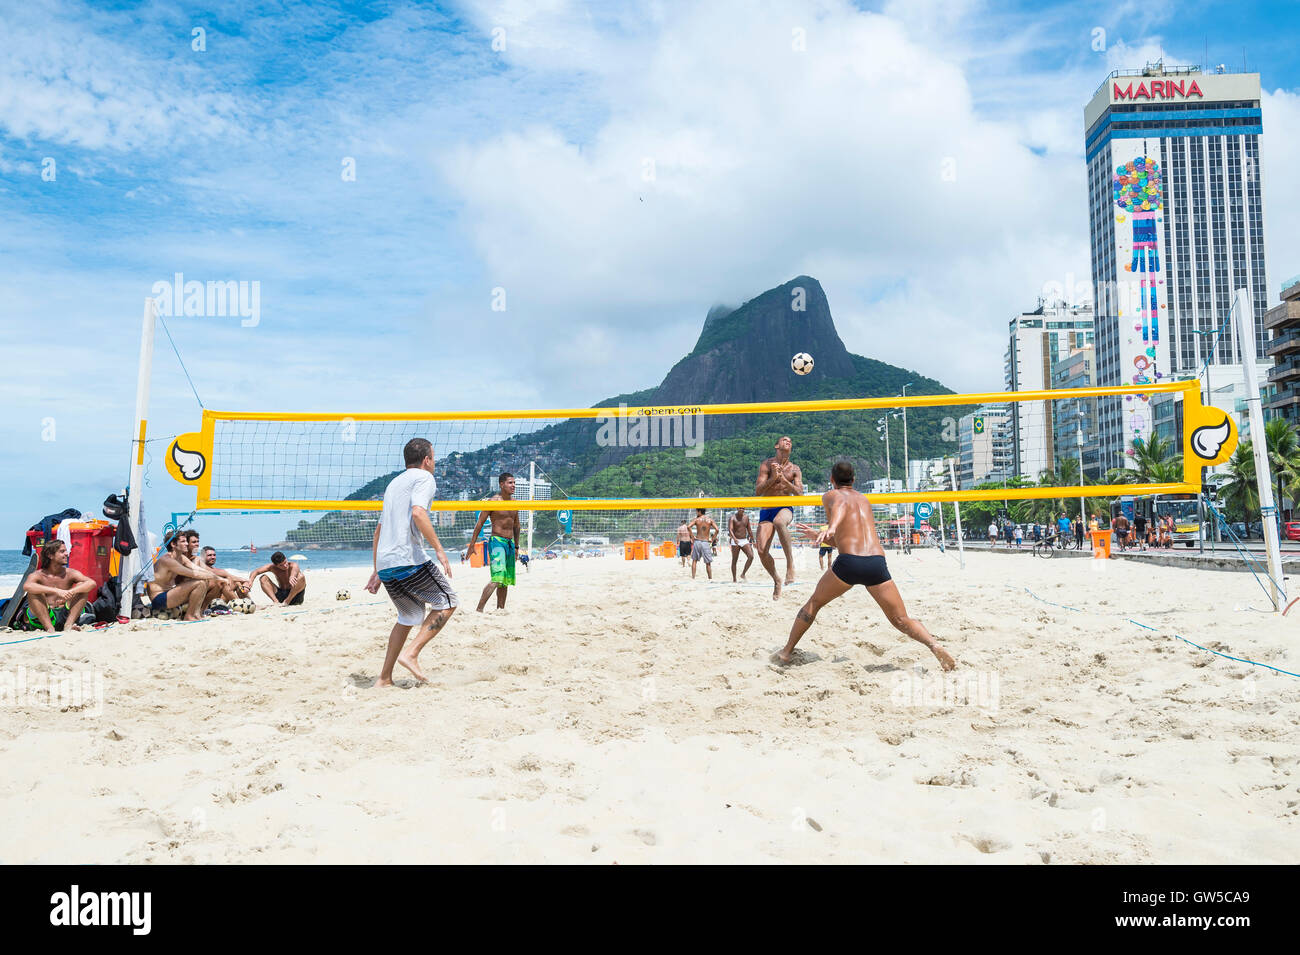 RIO DE JANEIRO - MARCH 17, 2016: Young Brazilian men play a game of futevolei (footvolley), a combo of football and volleyball Stock Photo